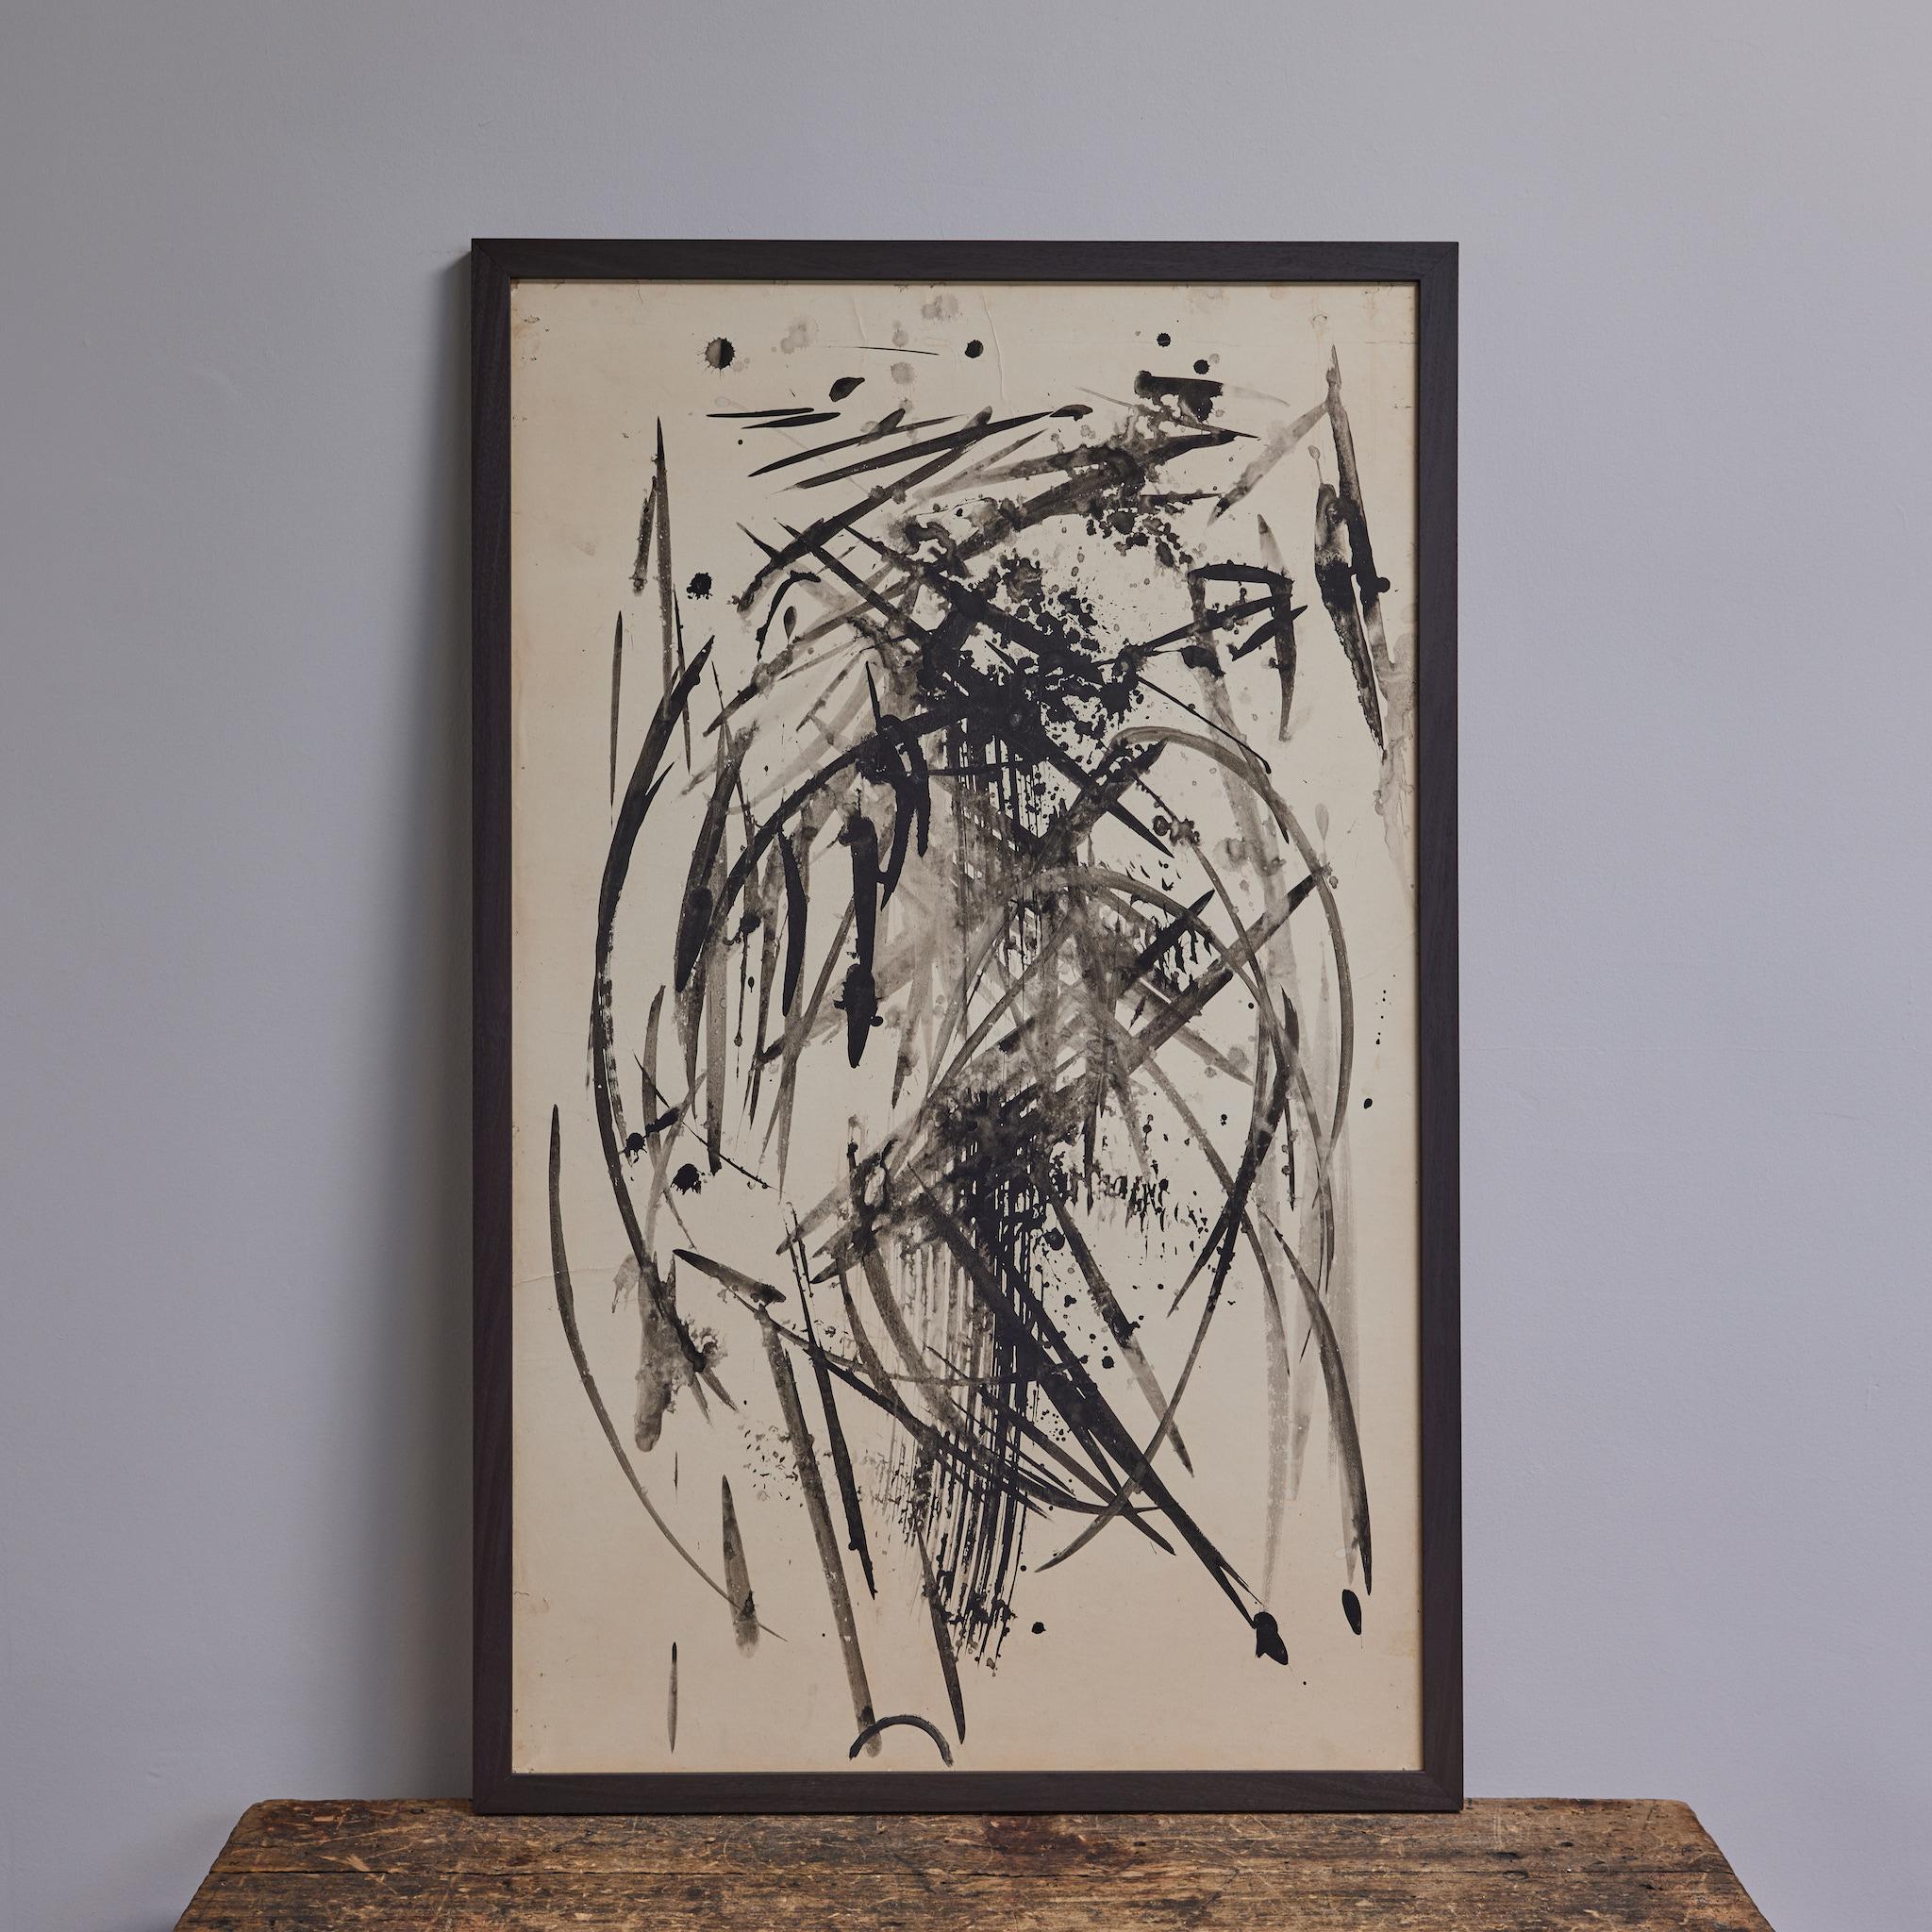 French mid-century black and white Abstract Expressionist oil painting on canvas. With a highly energetic quality, the piece is evocative of the later experiments of Kandinsky and Pollock. The fluid brushstrokes create a lively, calligraphic effect,